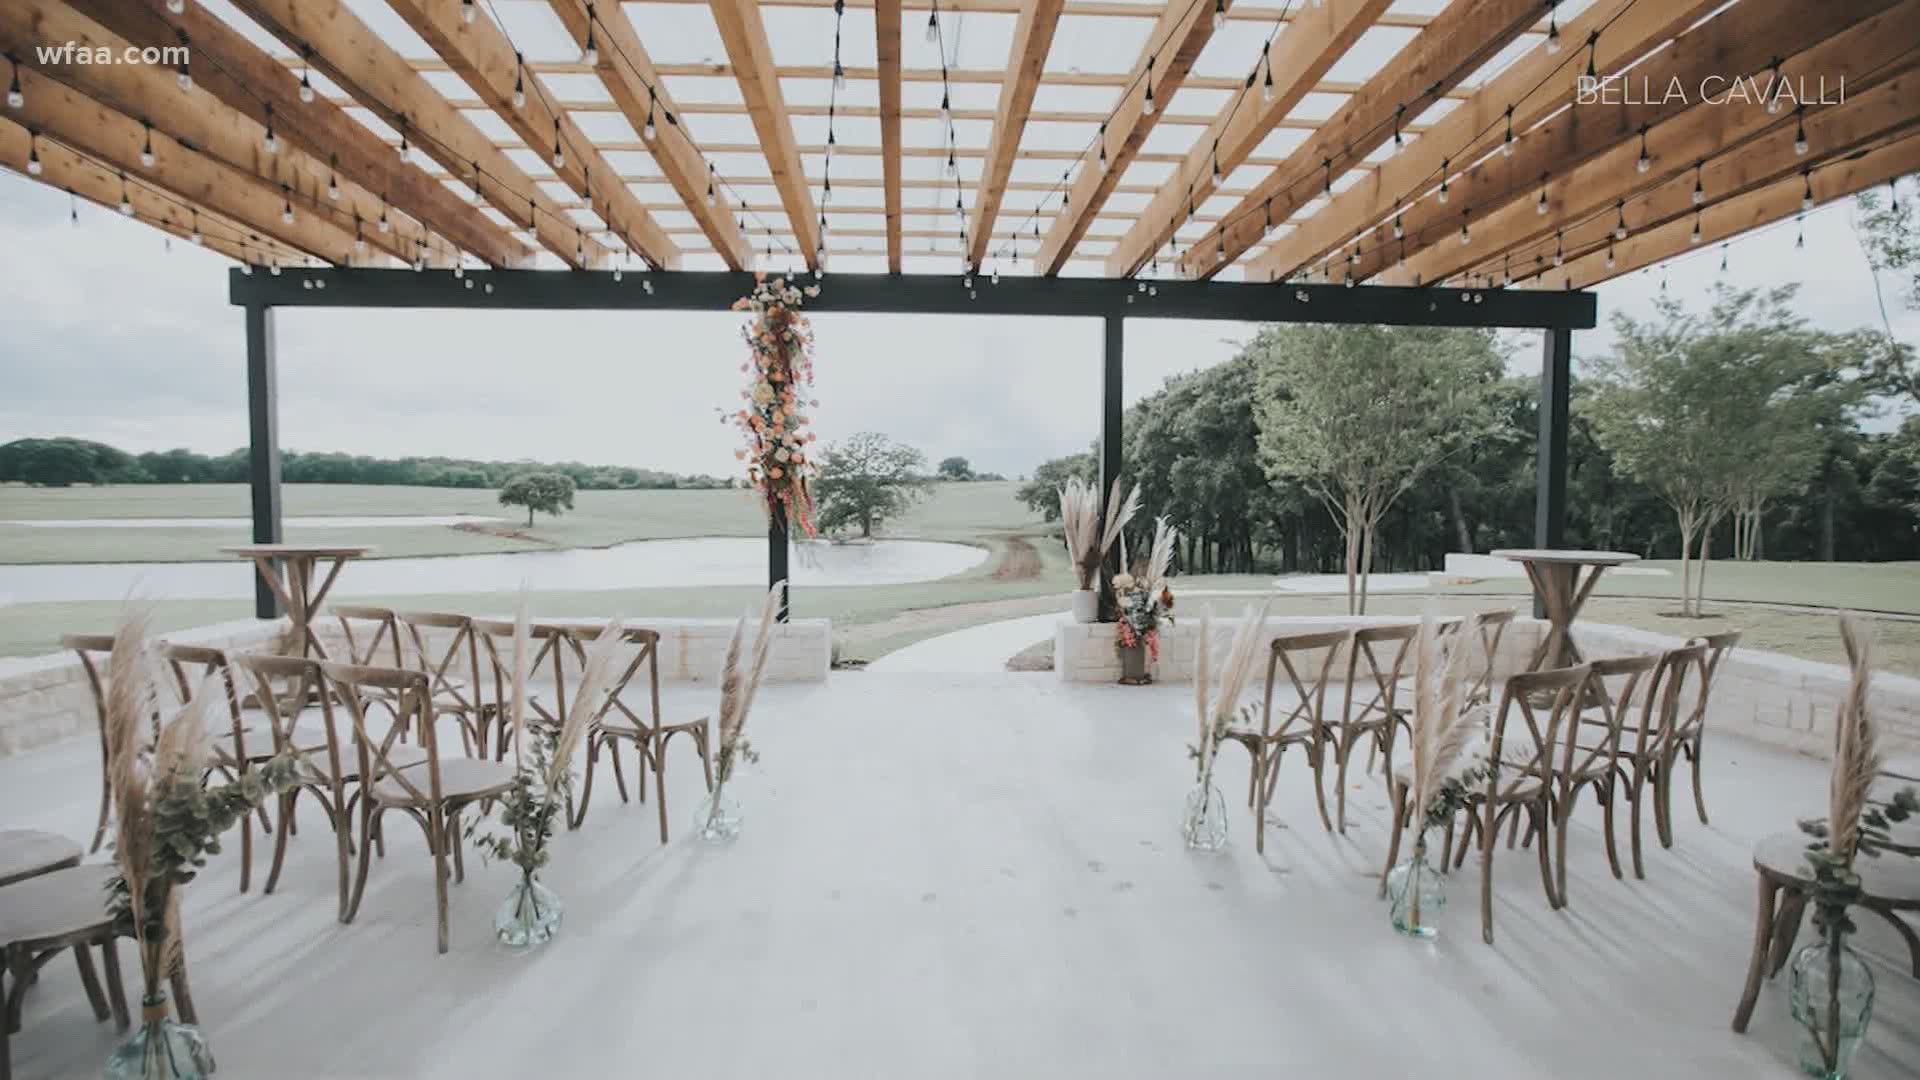 Governor Abbott's executive order bans indoor and outdoor gatherings larger 10 but did make a exception for weddings.